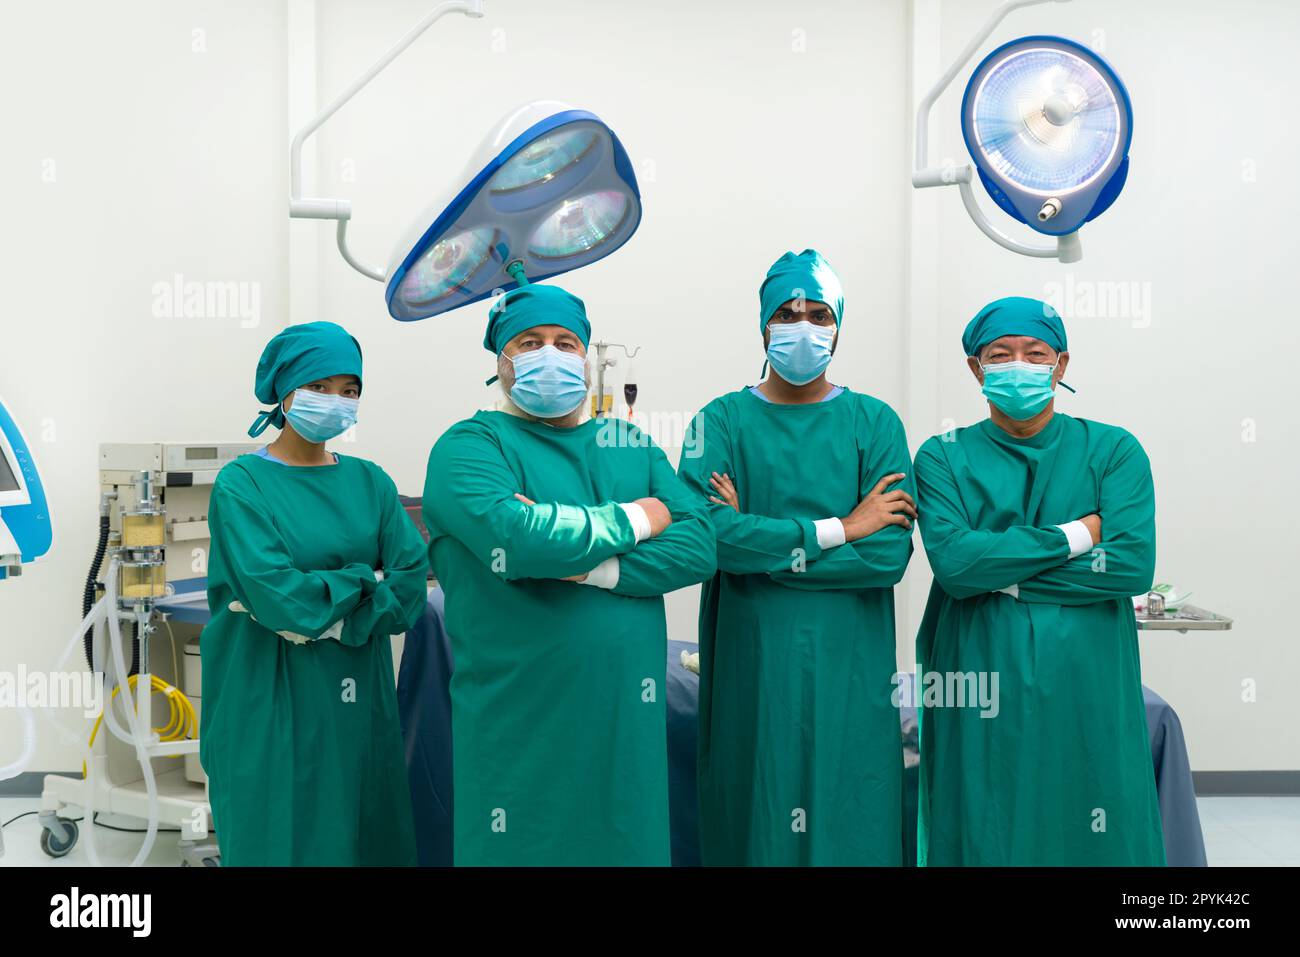 Group of surgeon and nurse in surgical green gown uniform stand confidently with their arm folded before performing an operation in the operating room. Stock Photo